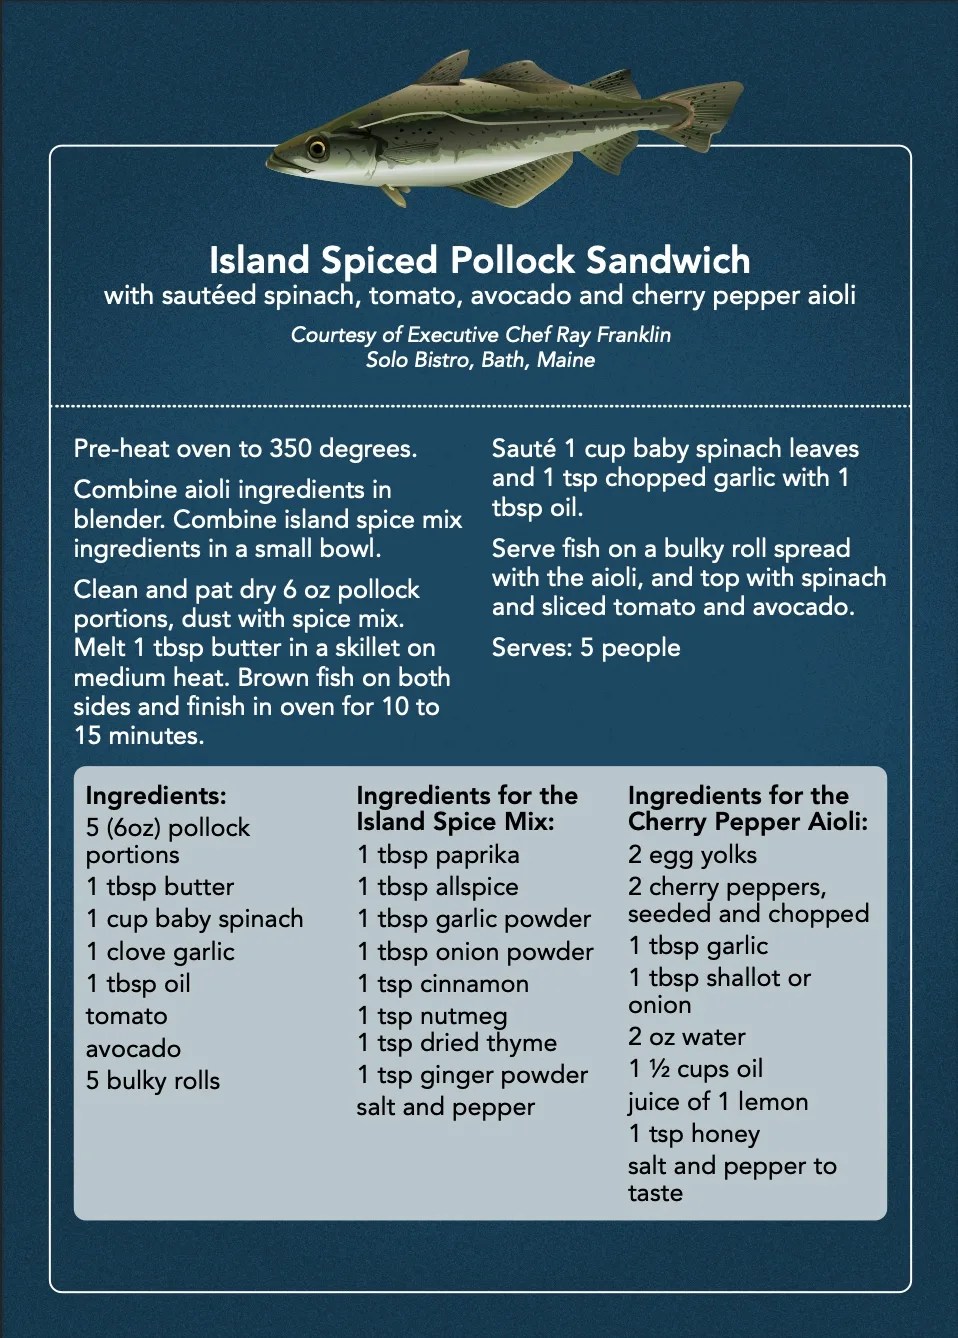 Dark blue card with a drawing of a pollock and white text. The recipe title says: Island Spiced Pollock Sandwich with sauteed spinach, tomato, avocado and cherry pepper aioli. Courtesy of Executive Chef Ray Franklin of the Solo Bistro in Bath, Maine.